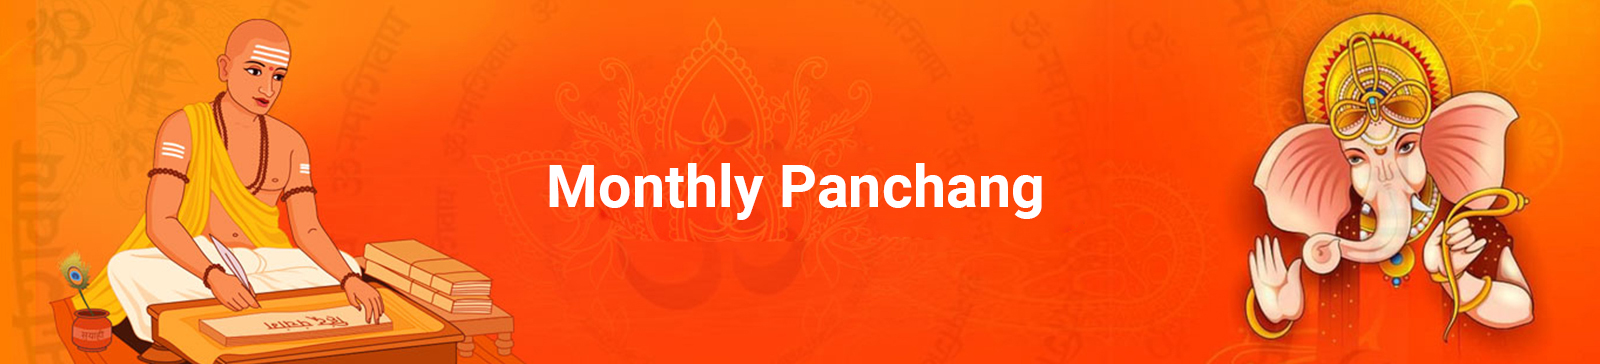 monthly-panchang